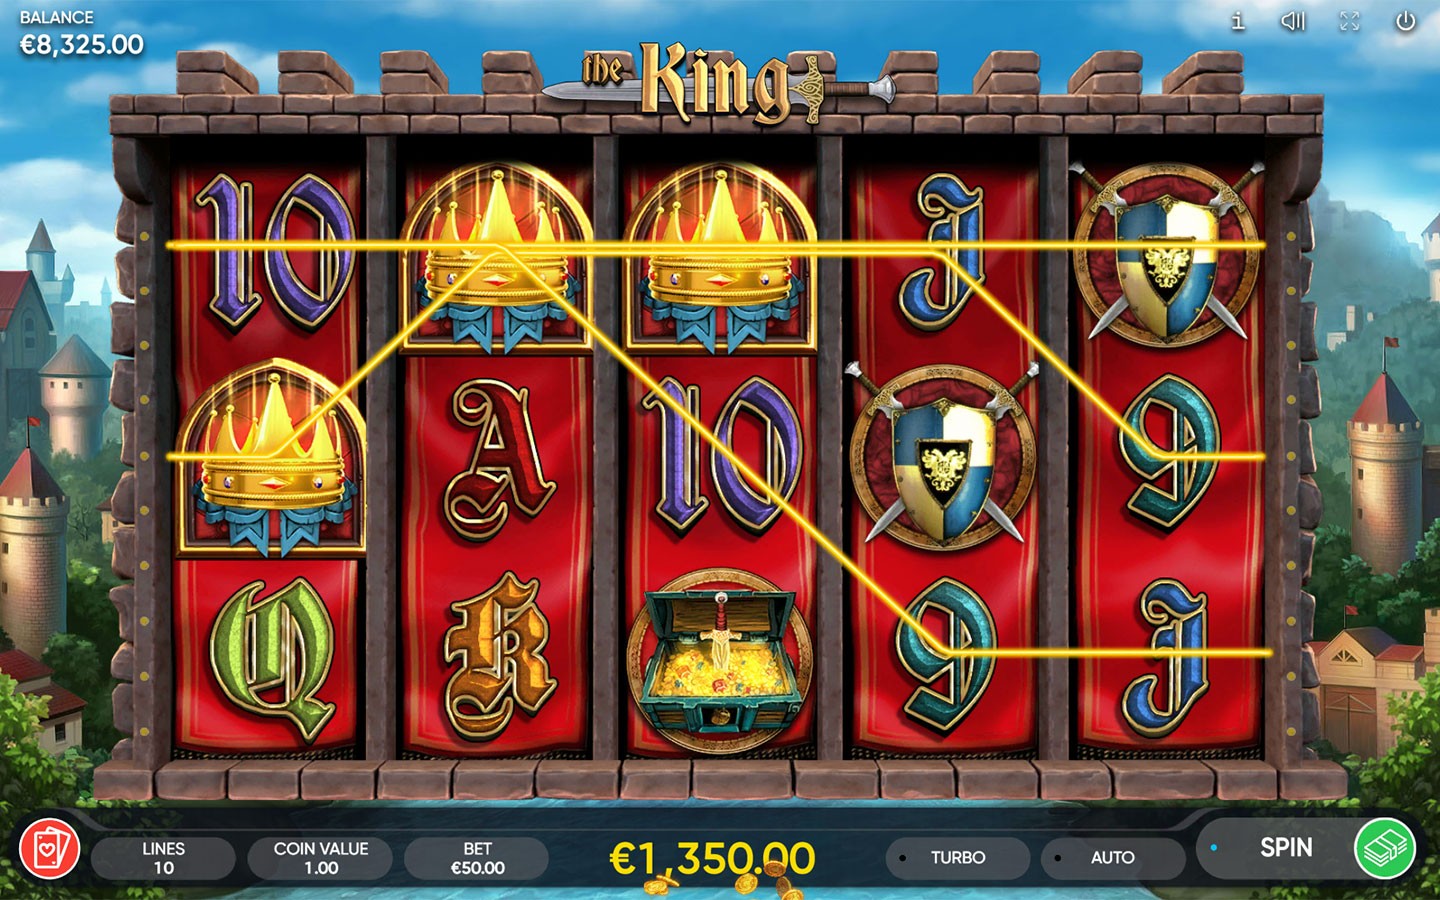 BEST ADVENTURE SLOTS | Try THE KING SLOT